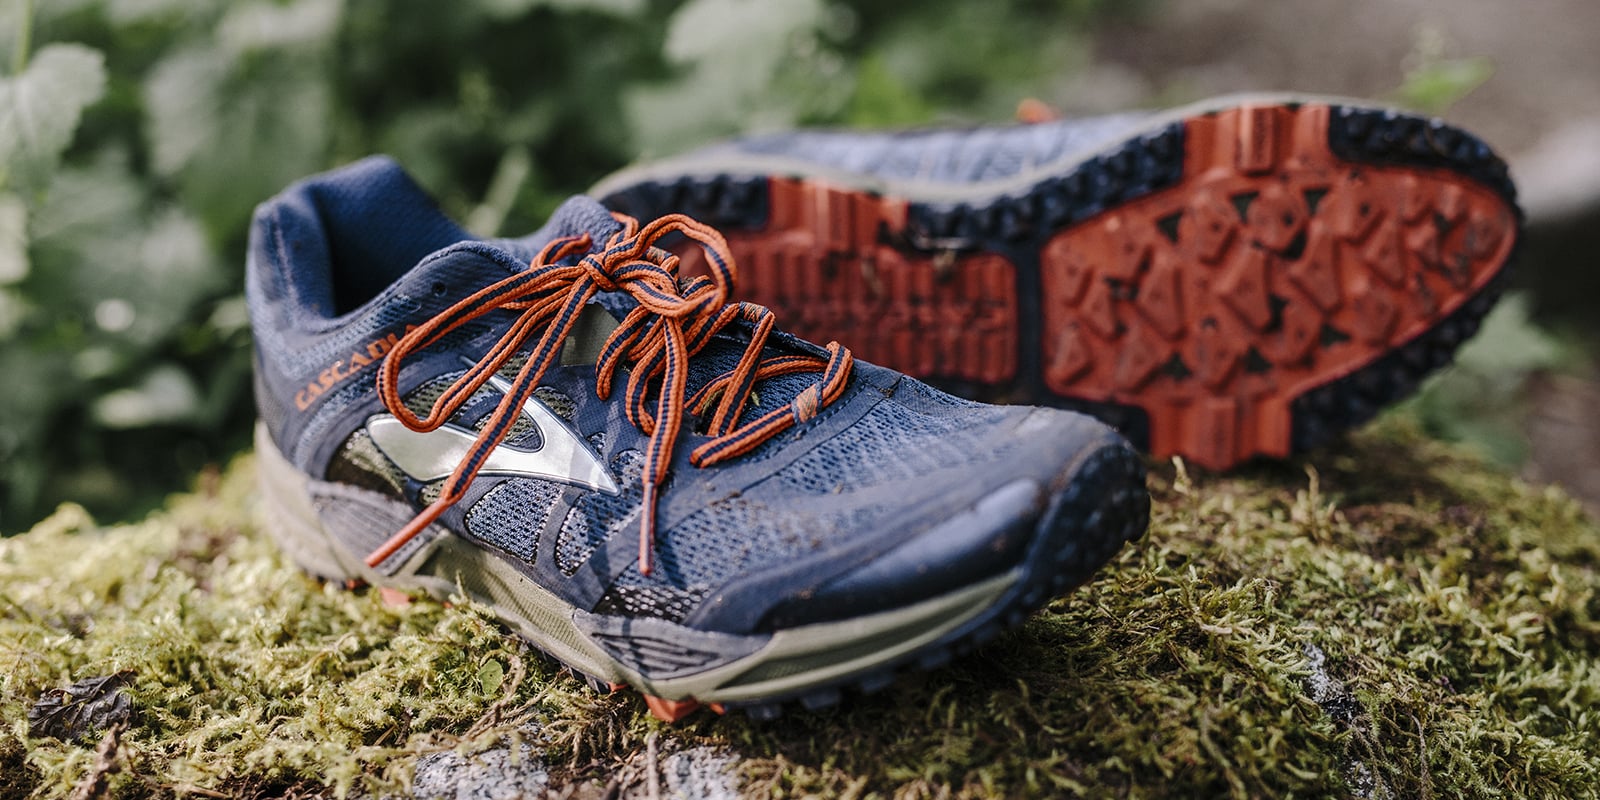 Nimble a Mountain Goat - The Best Trail Running Shoes for 2022